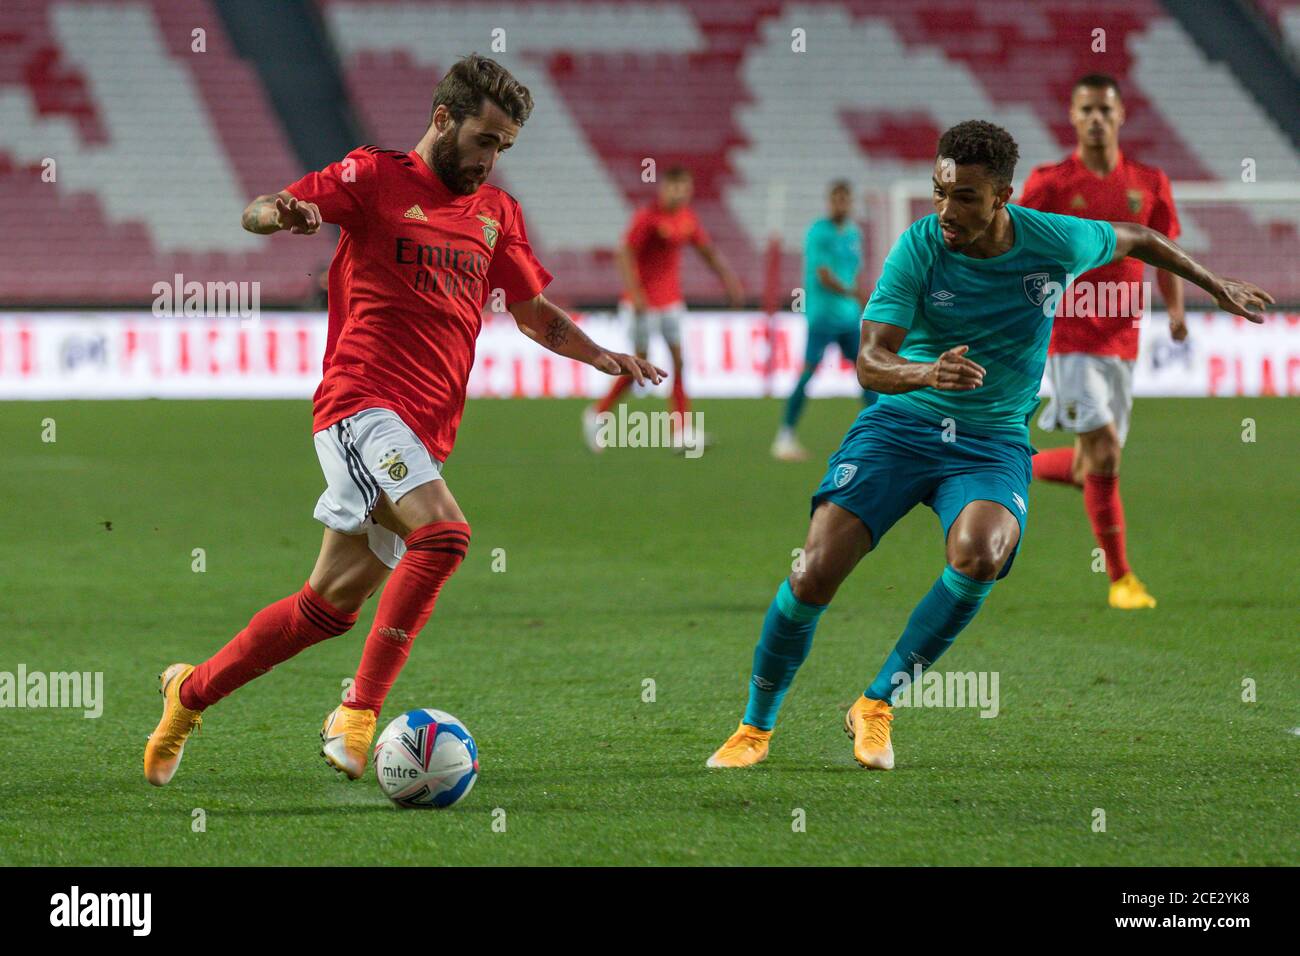 Lisbon, Portugal. August 30, 2020. Lisbon, Portugal. Benfica's forward from Portugal Rafa Silva (27) in action during the friendly game between SL Benfica vs AFC Bournemouth Credit: Alexandre de Sousa/Alamy Live News Stock Photo